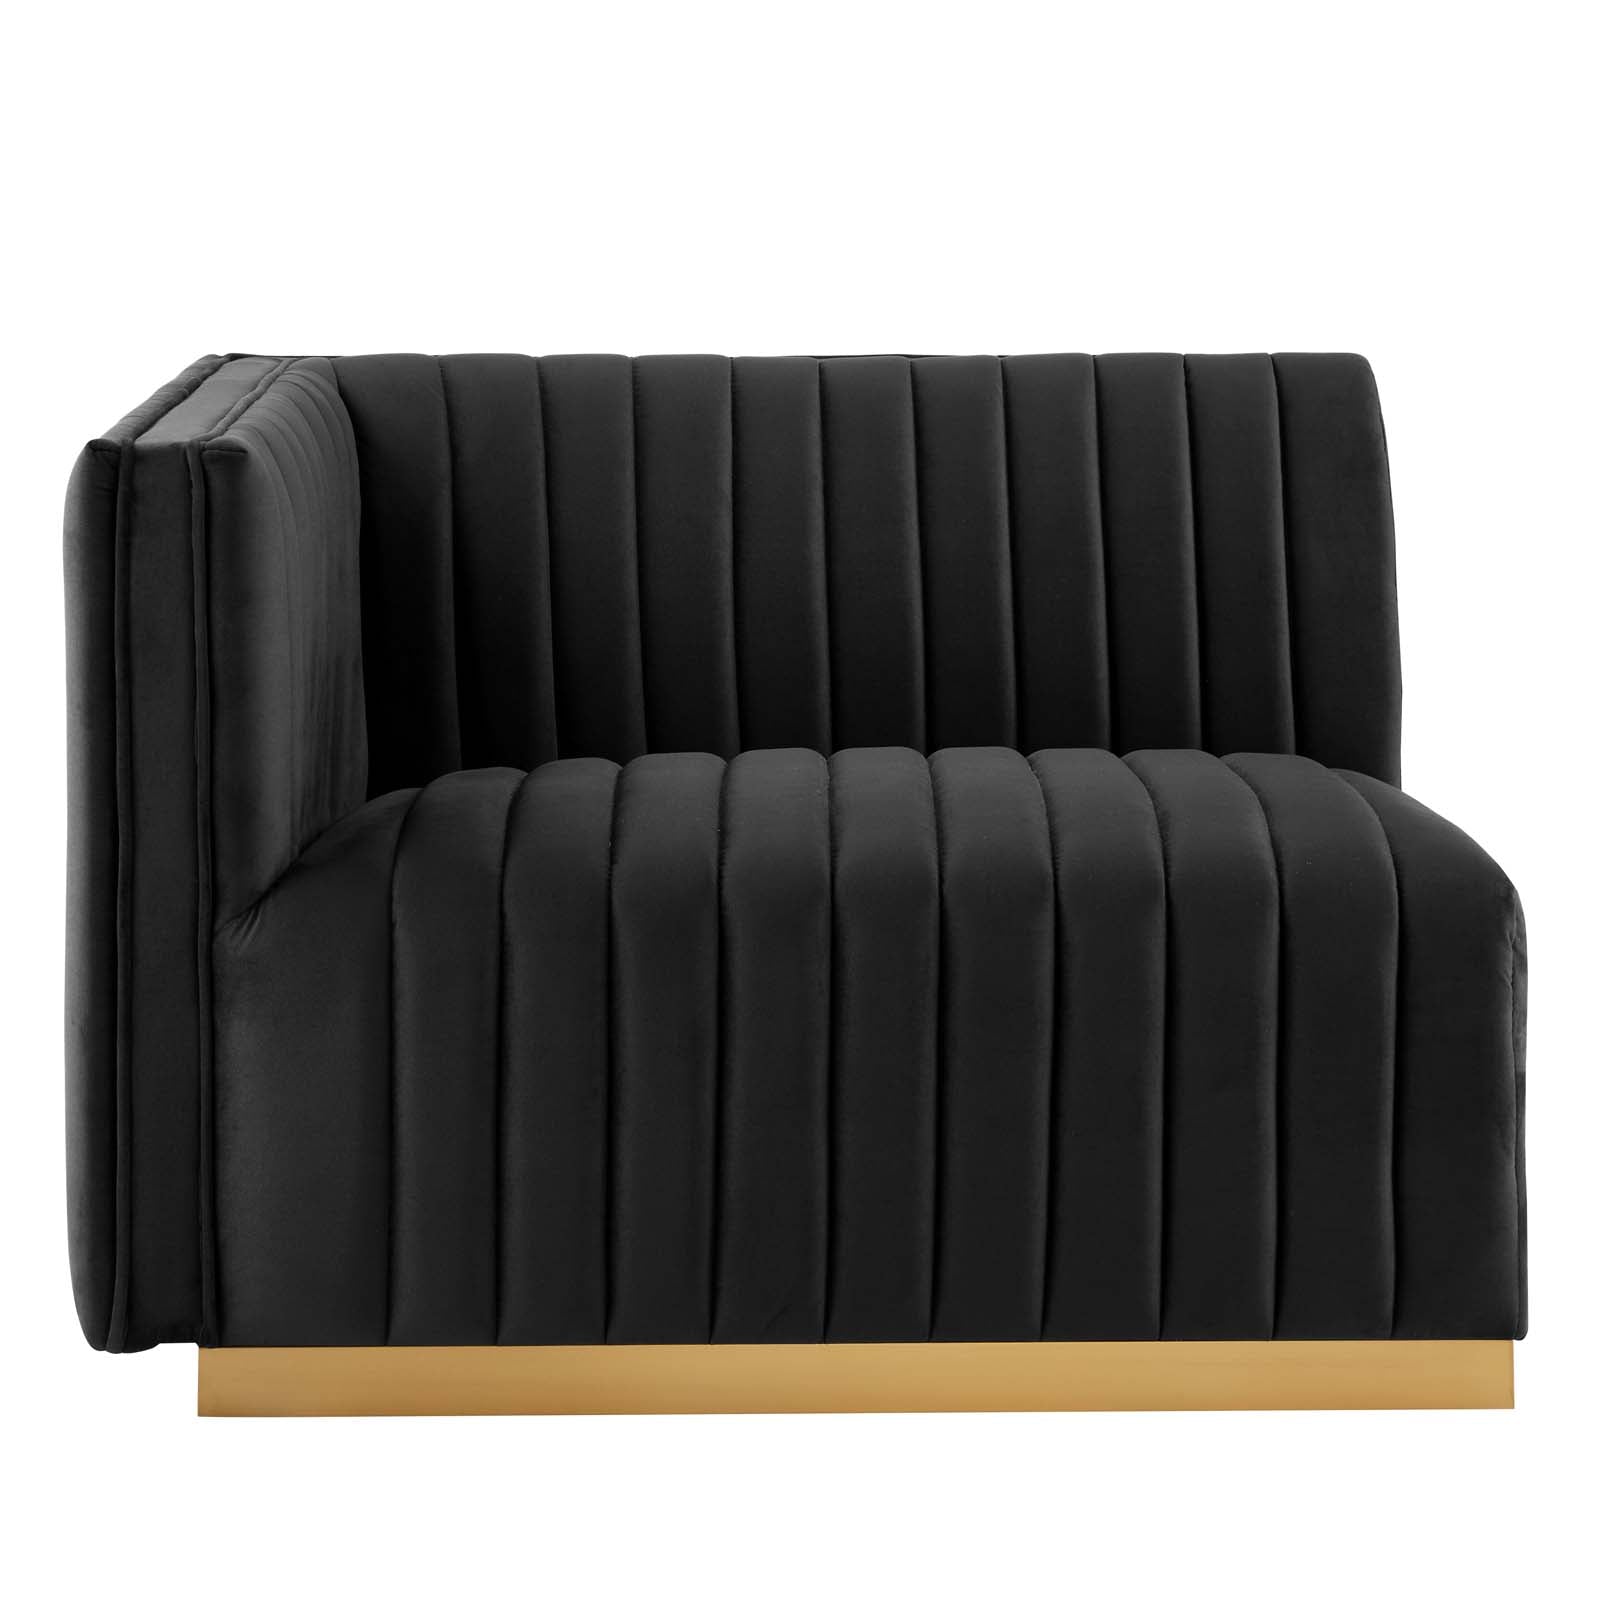 Modway Sectional Sofas - Conjure Channel Tufted Performance Velvet 6 Piece Sectional Gold Black